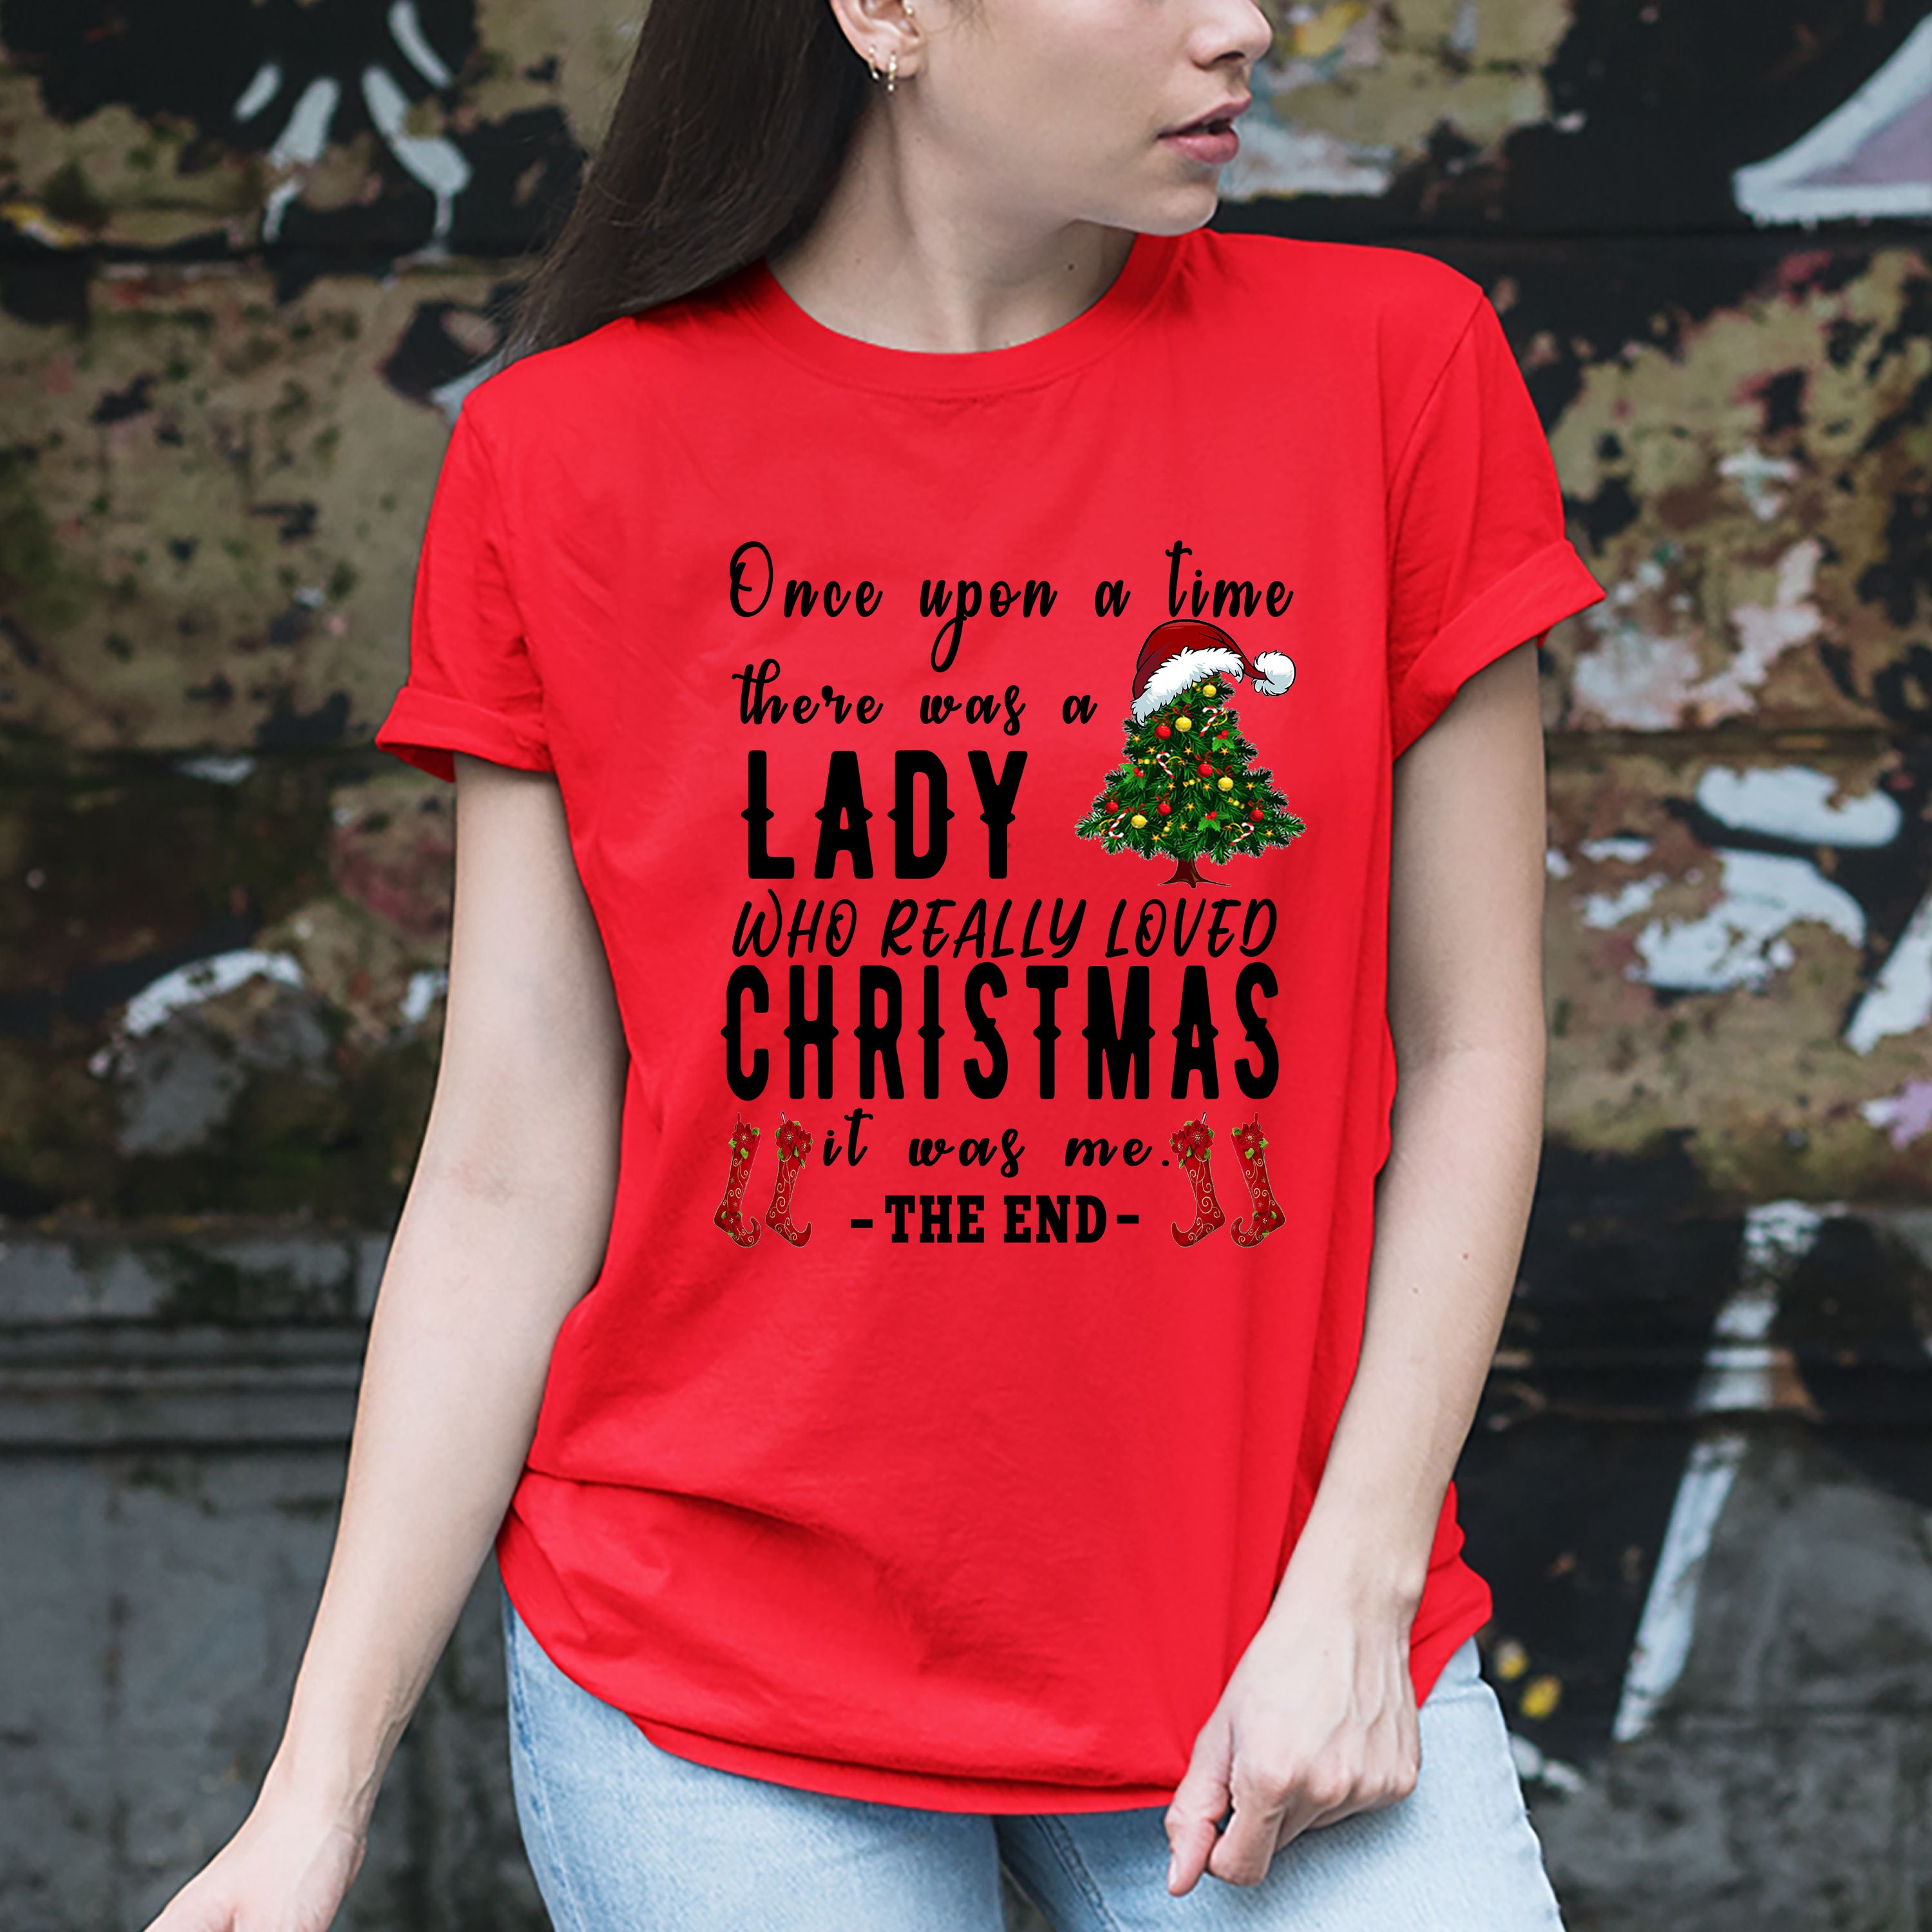 "A Lady Who Really Loved Christmas"